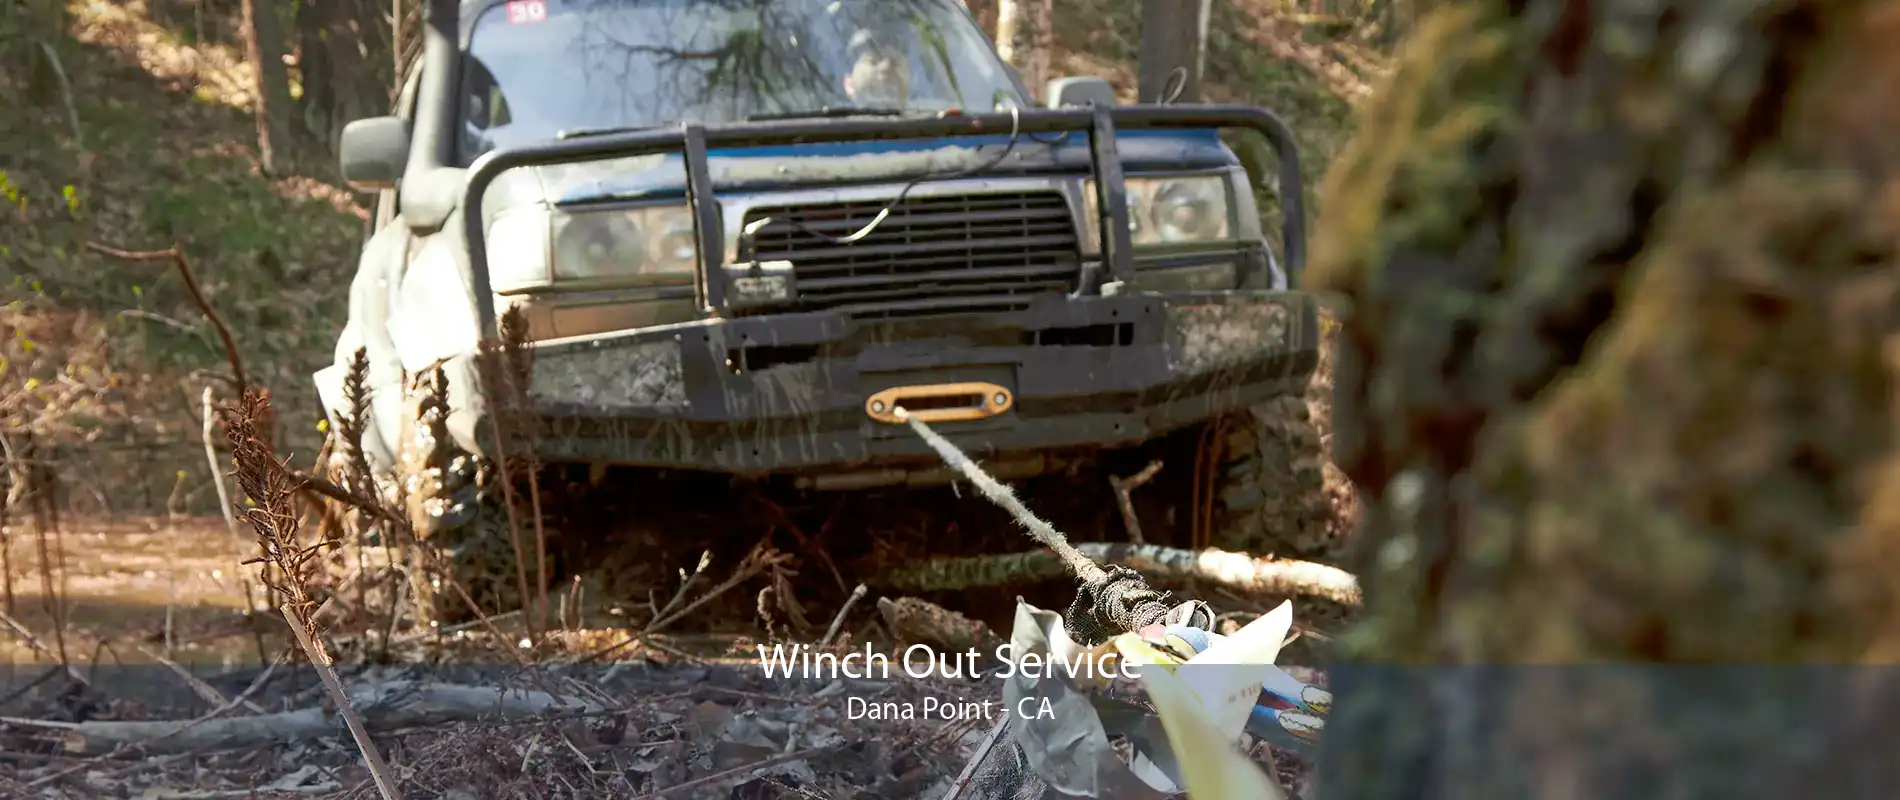 Winch Out Service Dana Point - CA